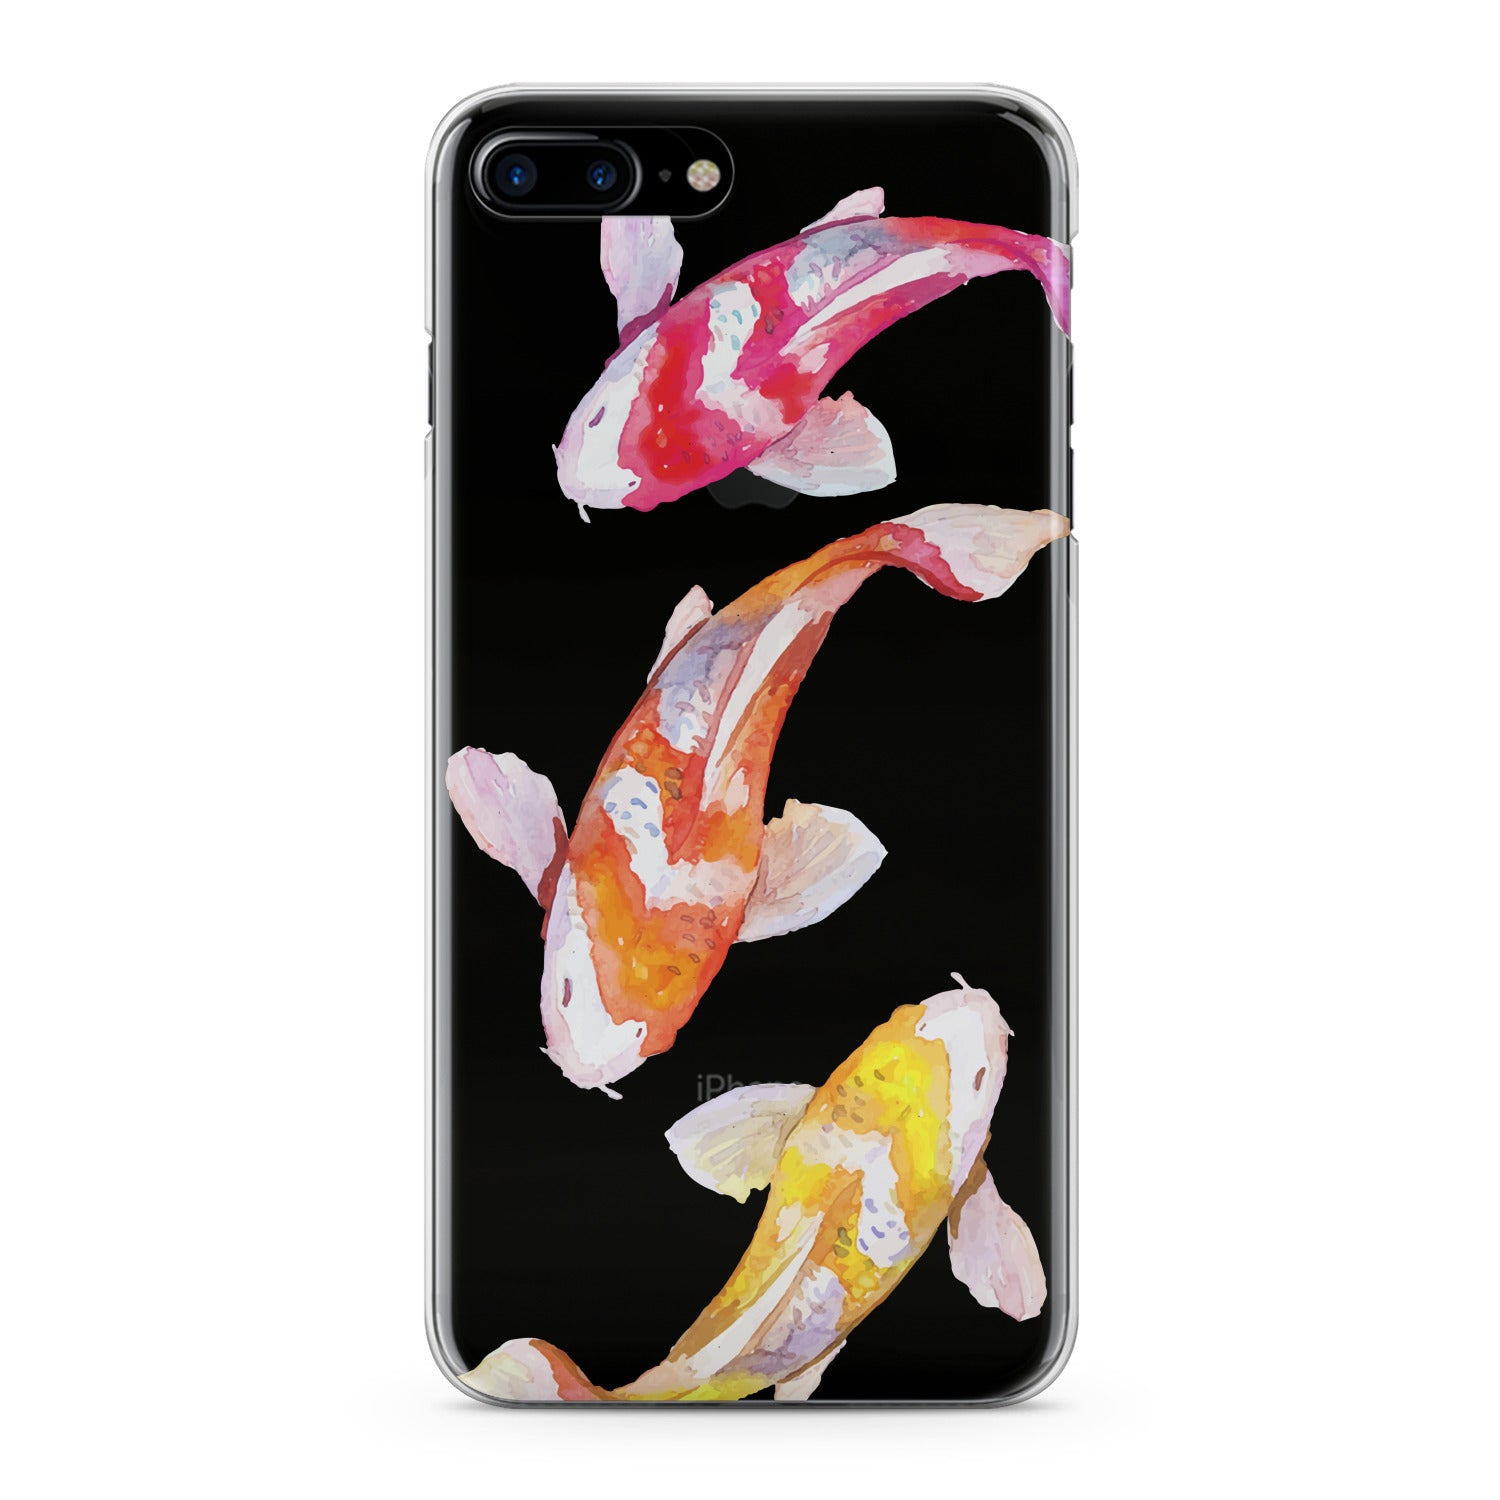 Lex Altern Colored Koi Fishes Phone Case for your iPhone & Android phone.